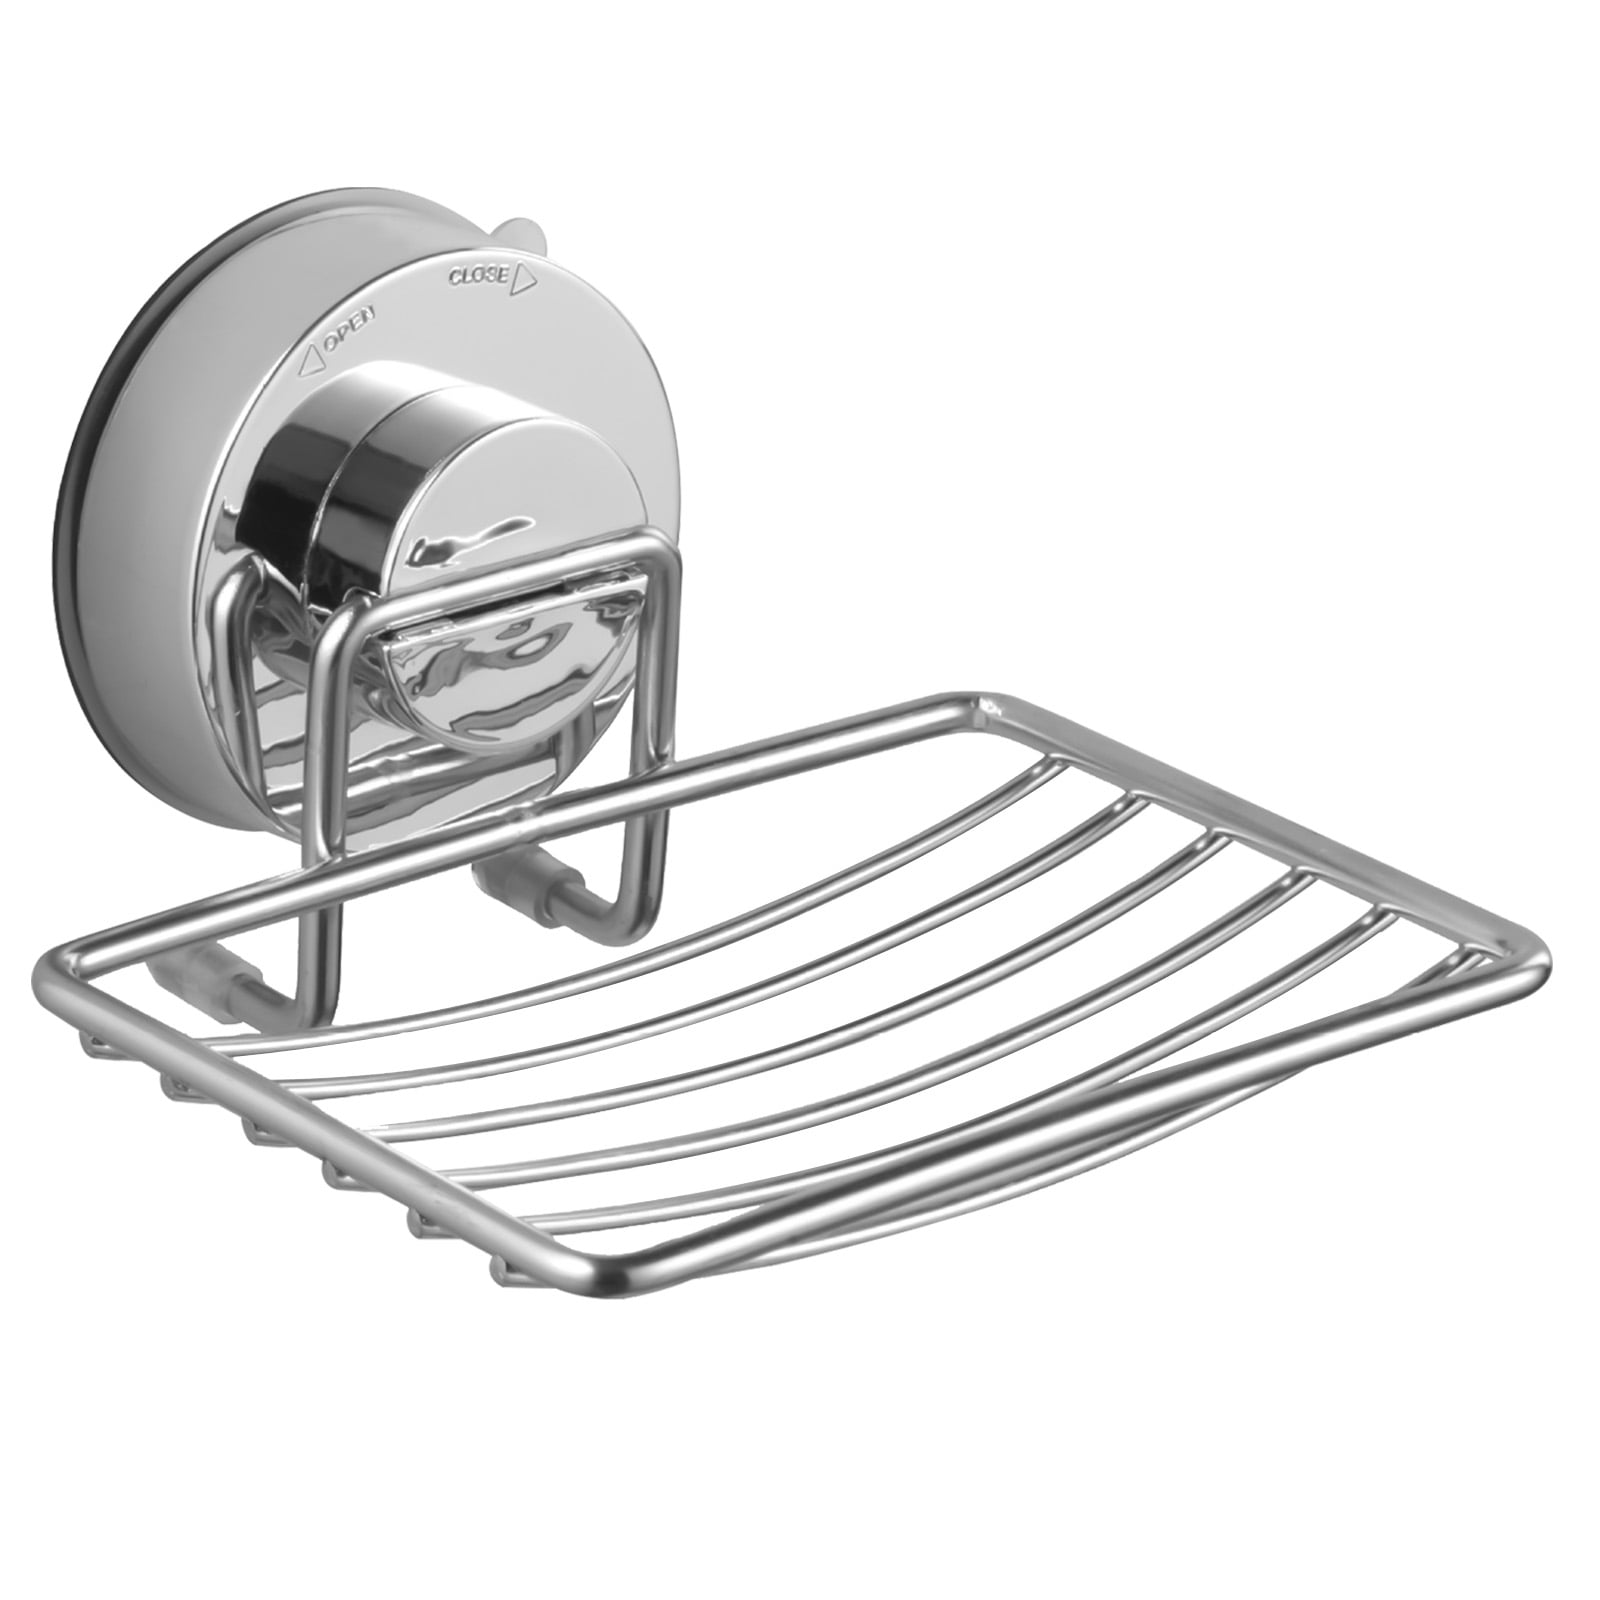 Strong Suction Chrome Soap Dish Holder Bathroom Shower Accessory Rack Cup Tray 